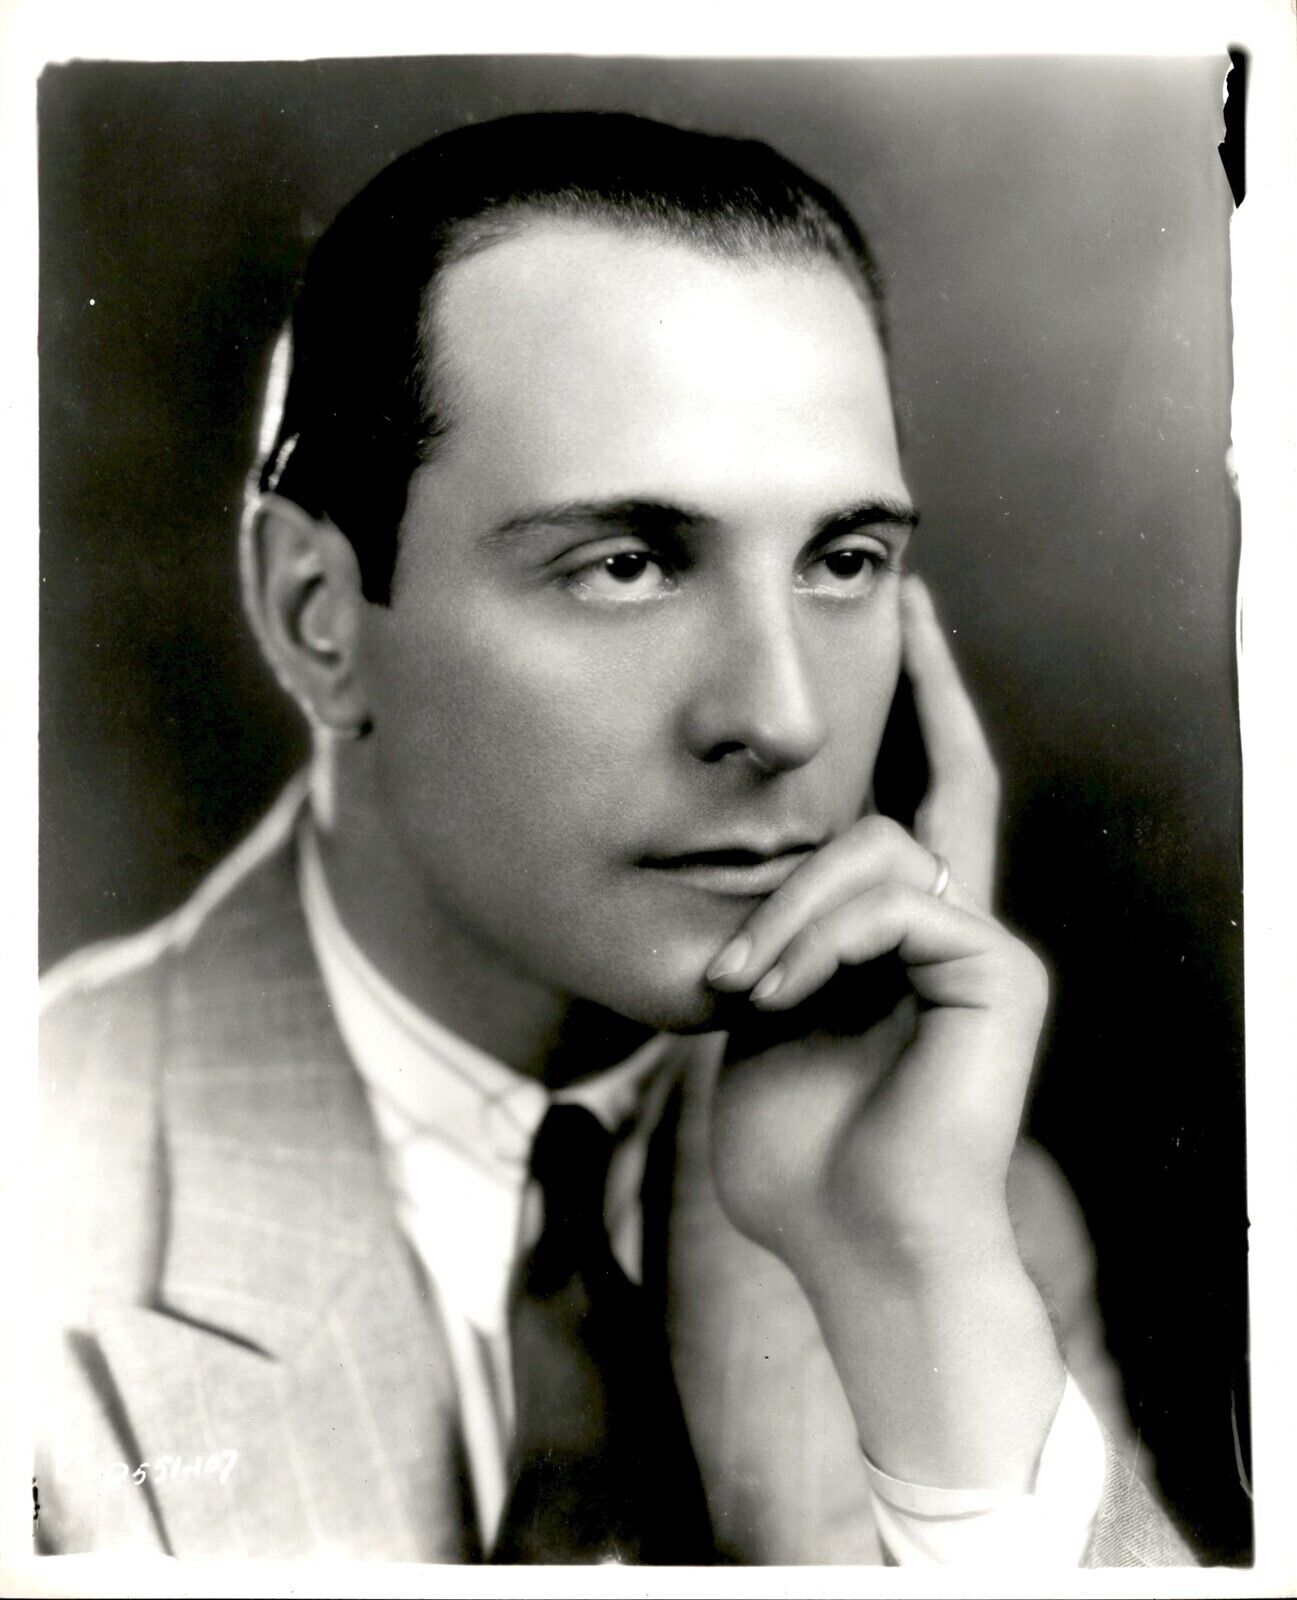 GA197 Original Photo HANDSOME ACTOR CLASSIC CINEMA STAR WITH SLICKED BACK HAIR